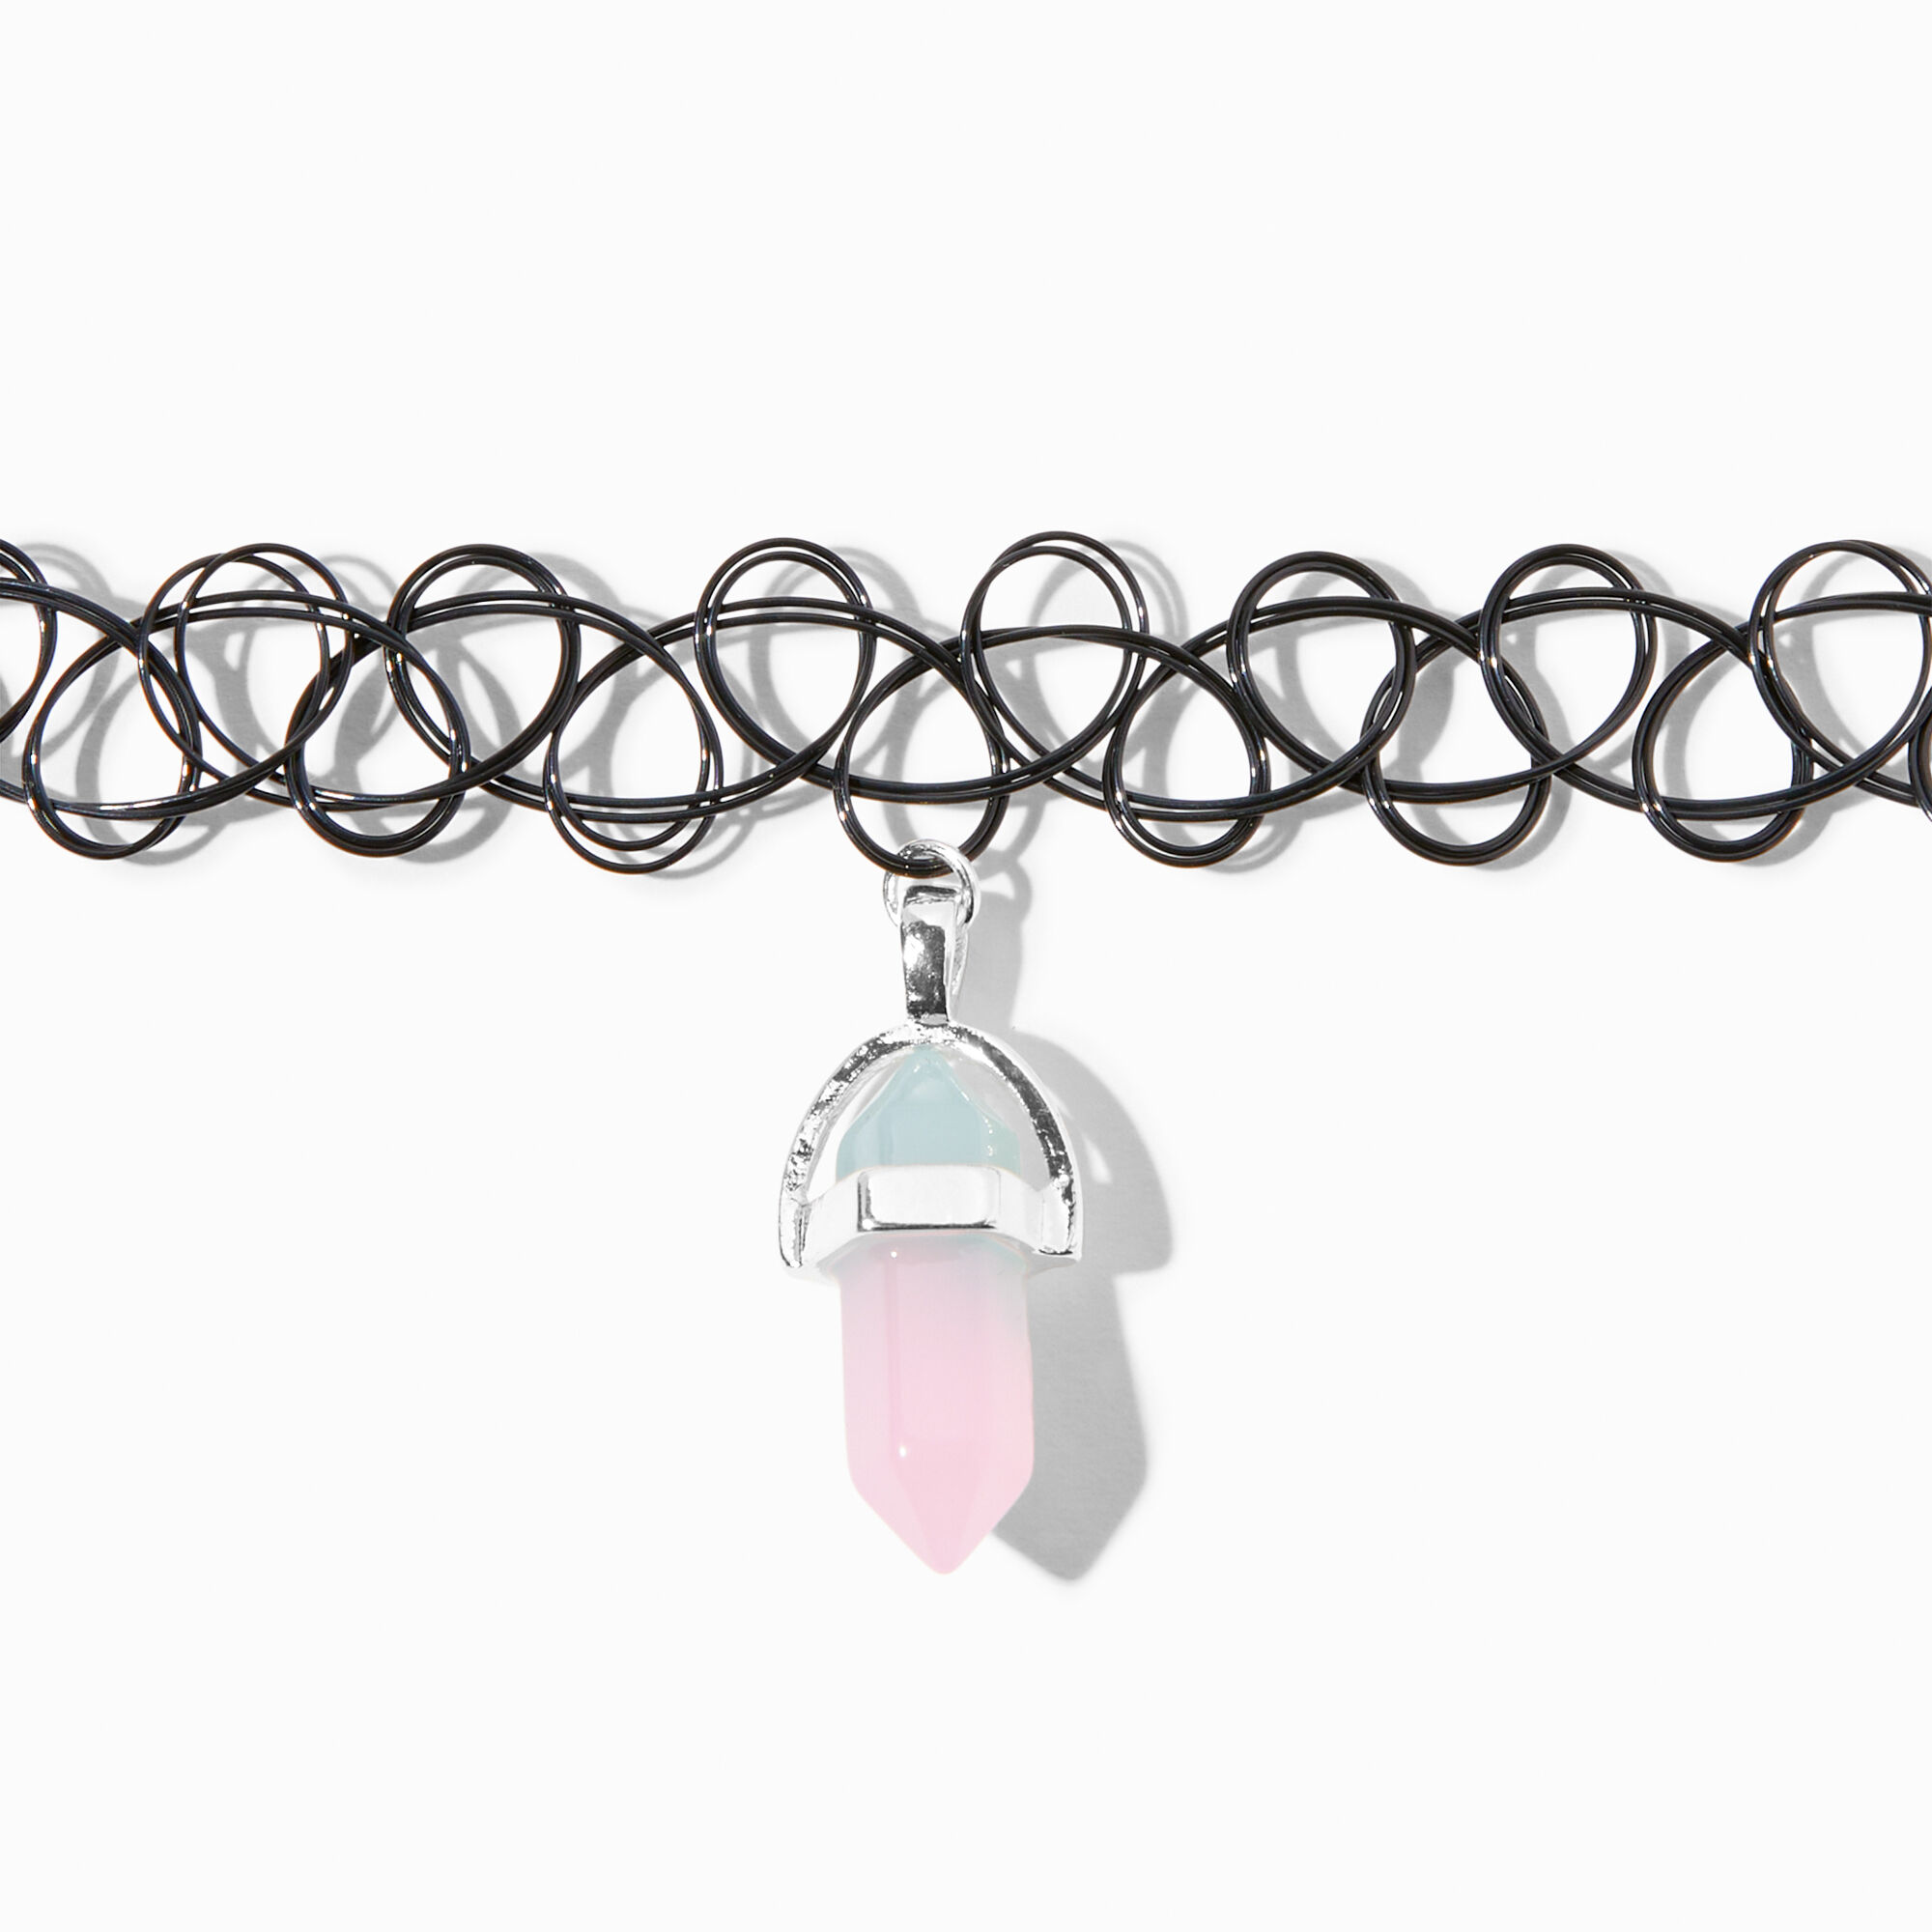 View Claires ColourChanging Mystical Gem Pendant Tattoo Choker Necklace Black information